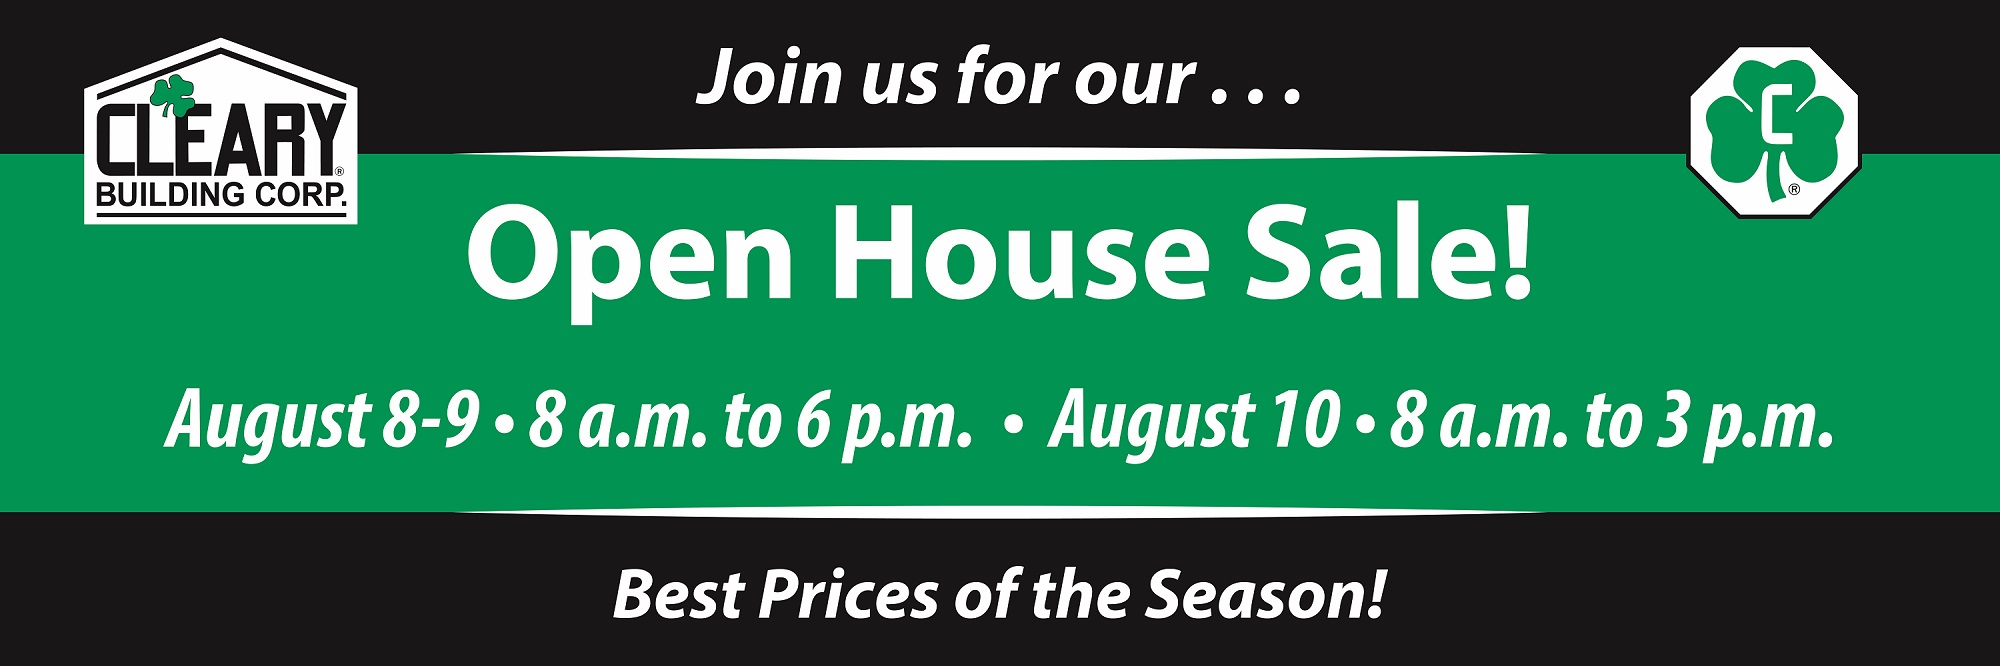 Join us for our Open House Sale! August 9-9: 8am-6pm. August 10: 8am-3pm. Best prices of the season!